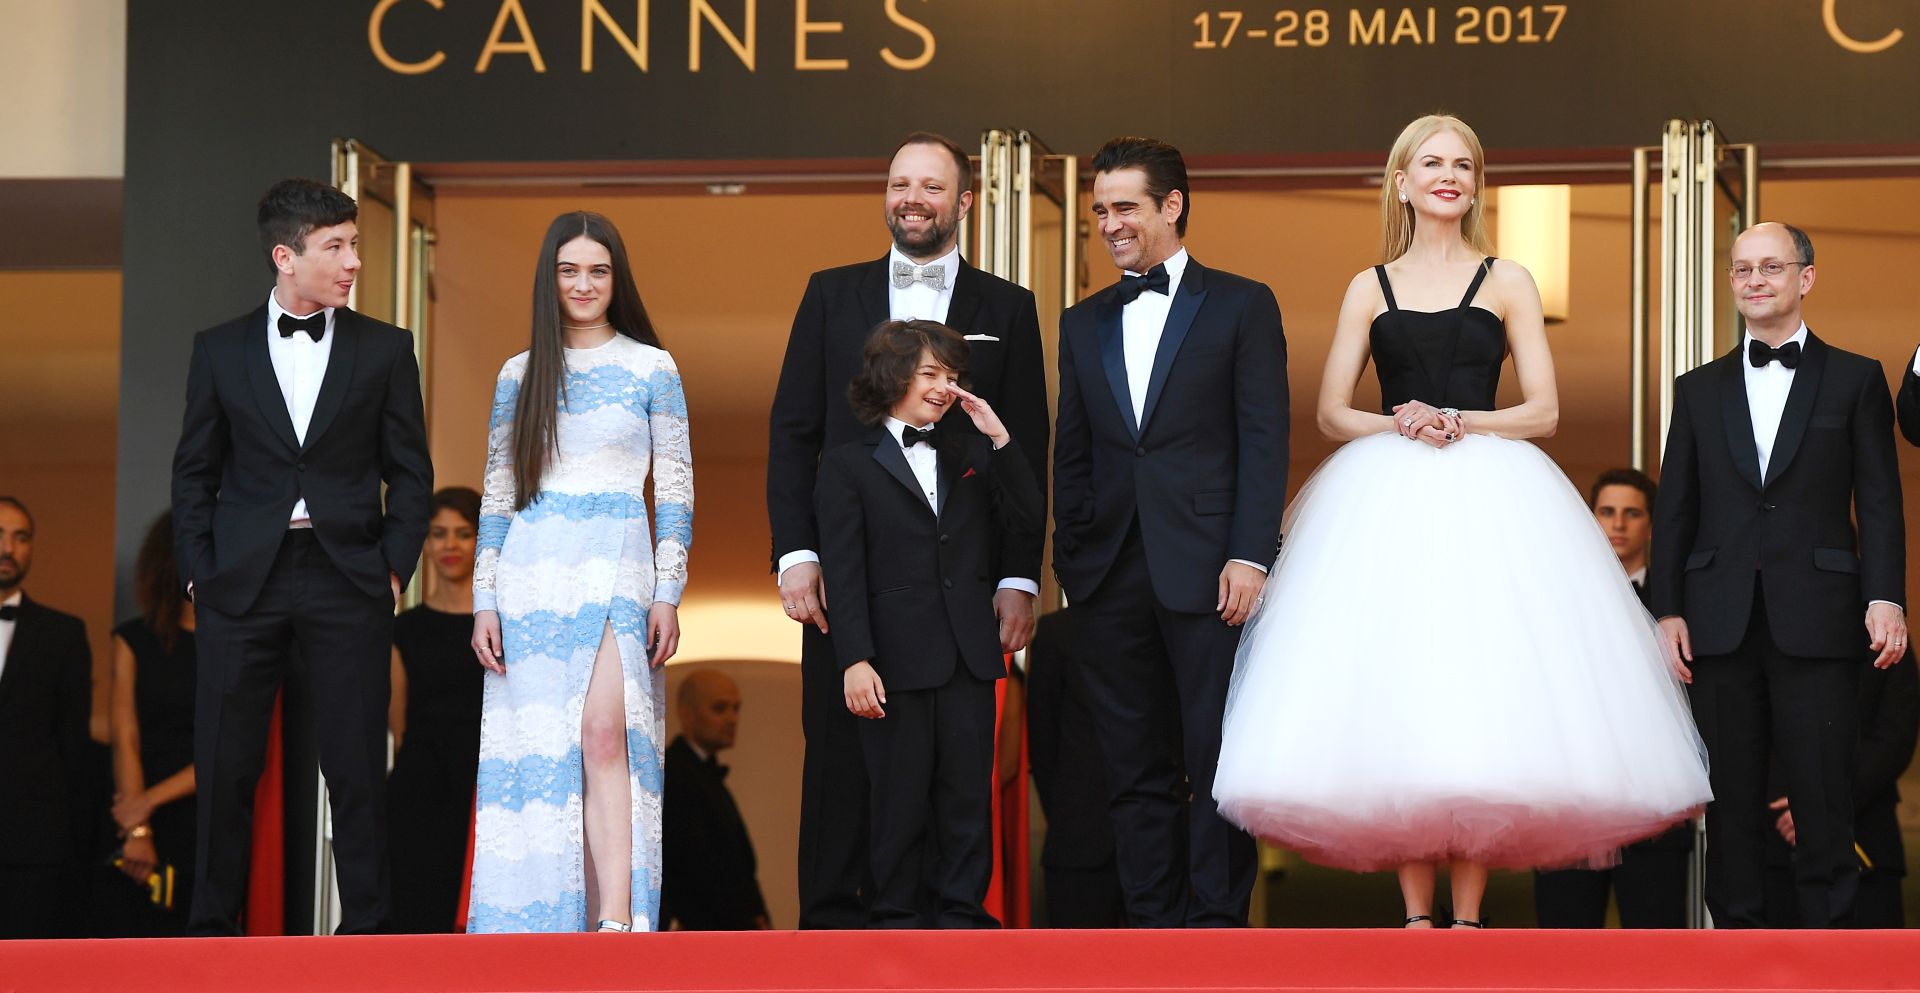 CANNES, FRANCE - MAY 22:  (L-R) Barry Keoghan, Raffey Cassidy, director Yorgos Lanthimos, Sunny Suljic, Colin Farrell, Nicole Kidman and producer Ed Guiney attend the "The Killing Of A Sacred Deer" screening during the 70th annual Cannes Film Festival at Palais des Festivals on May 22, 2017 in Cannes, France.  (Photo by Pascal Le Segretain/Getty Images)